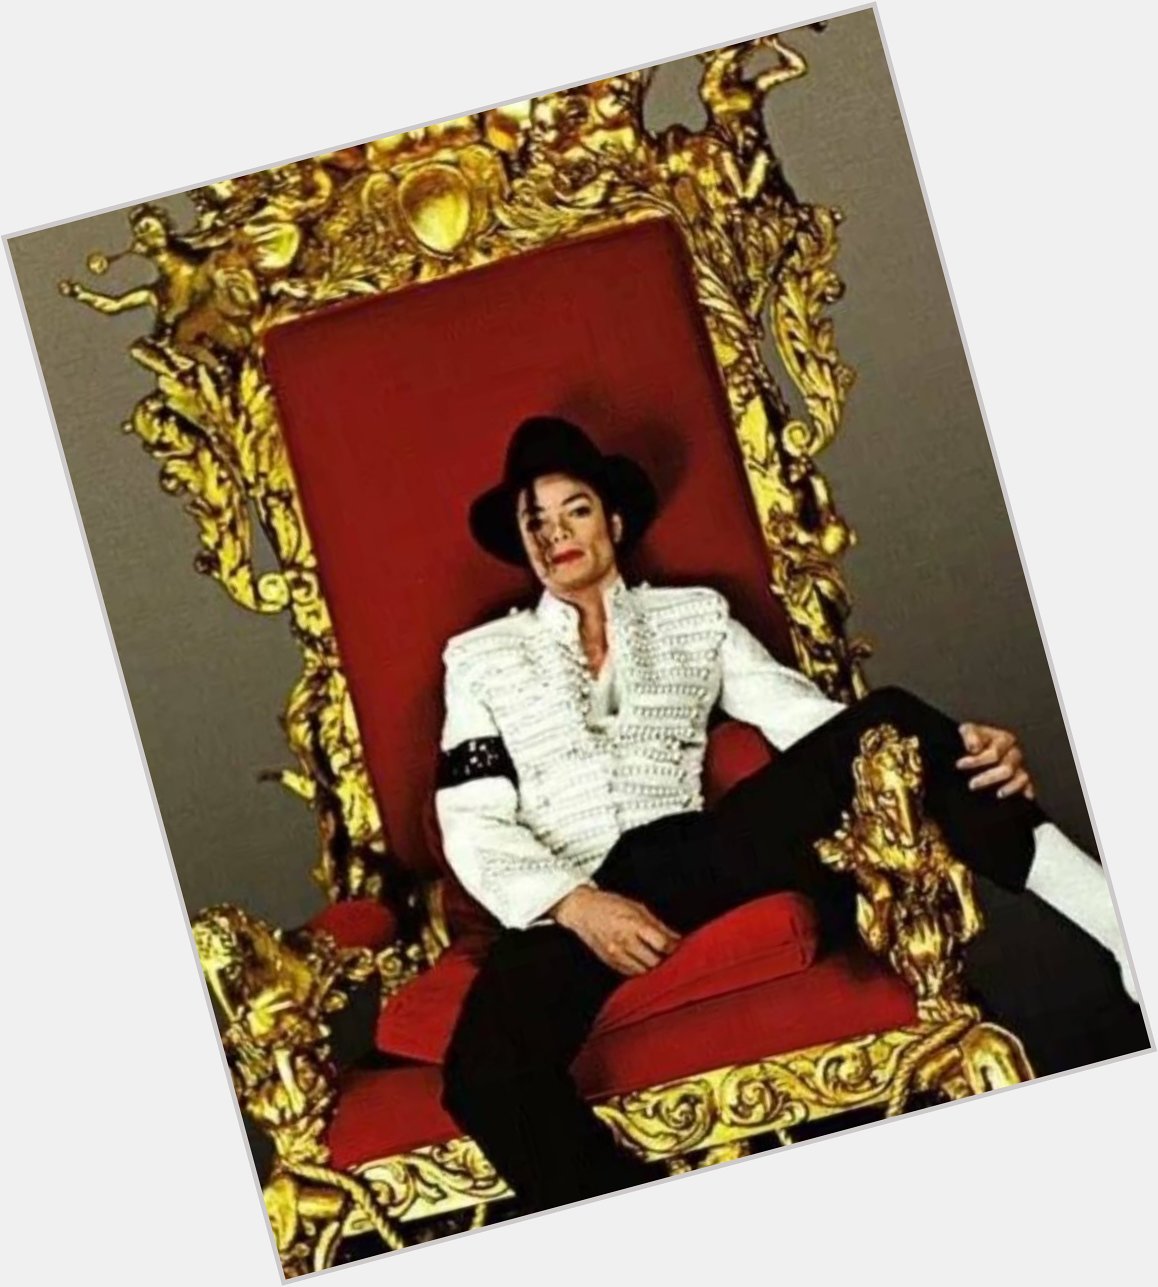 Happy birthday to the great King Michael Jackson. 